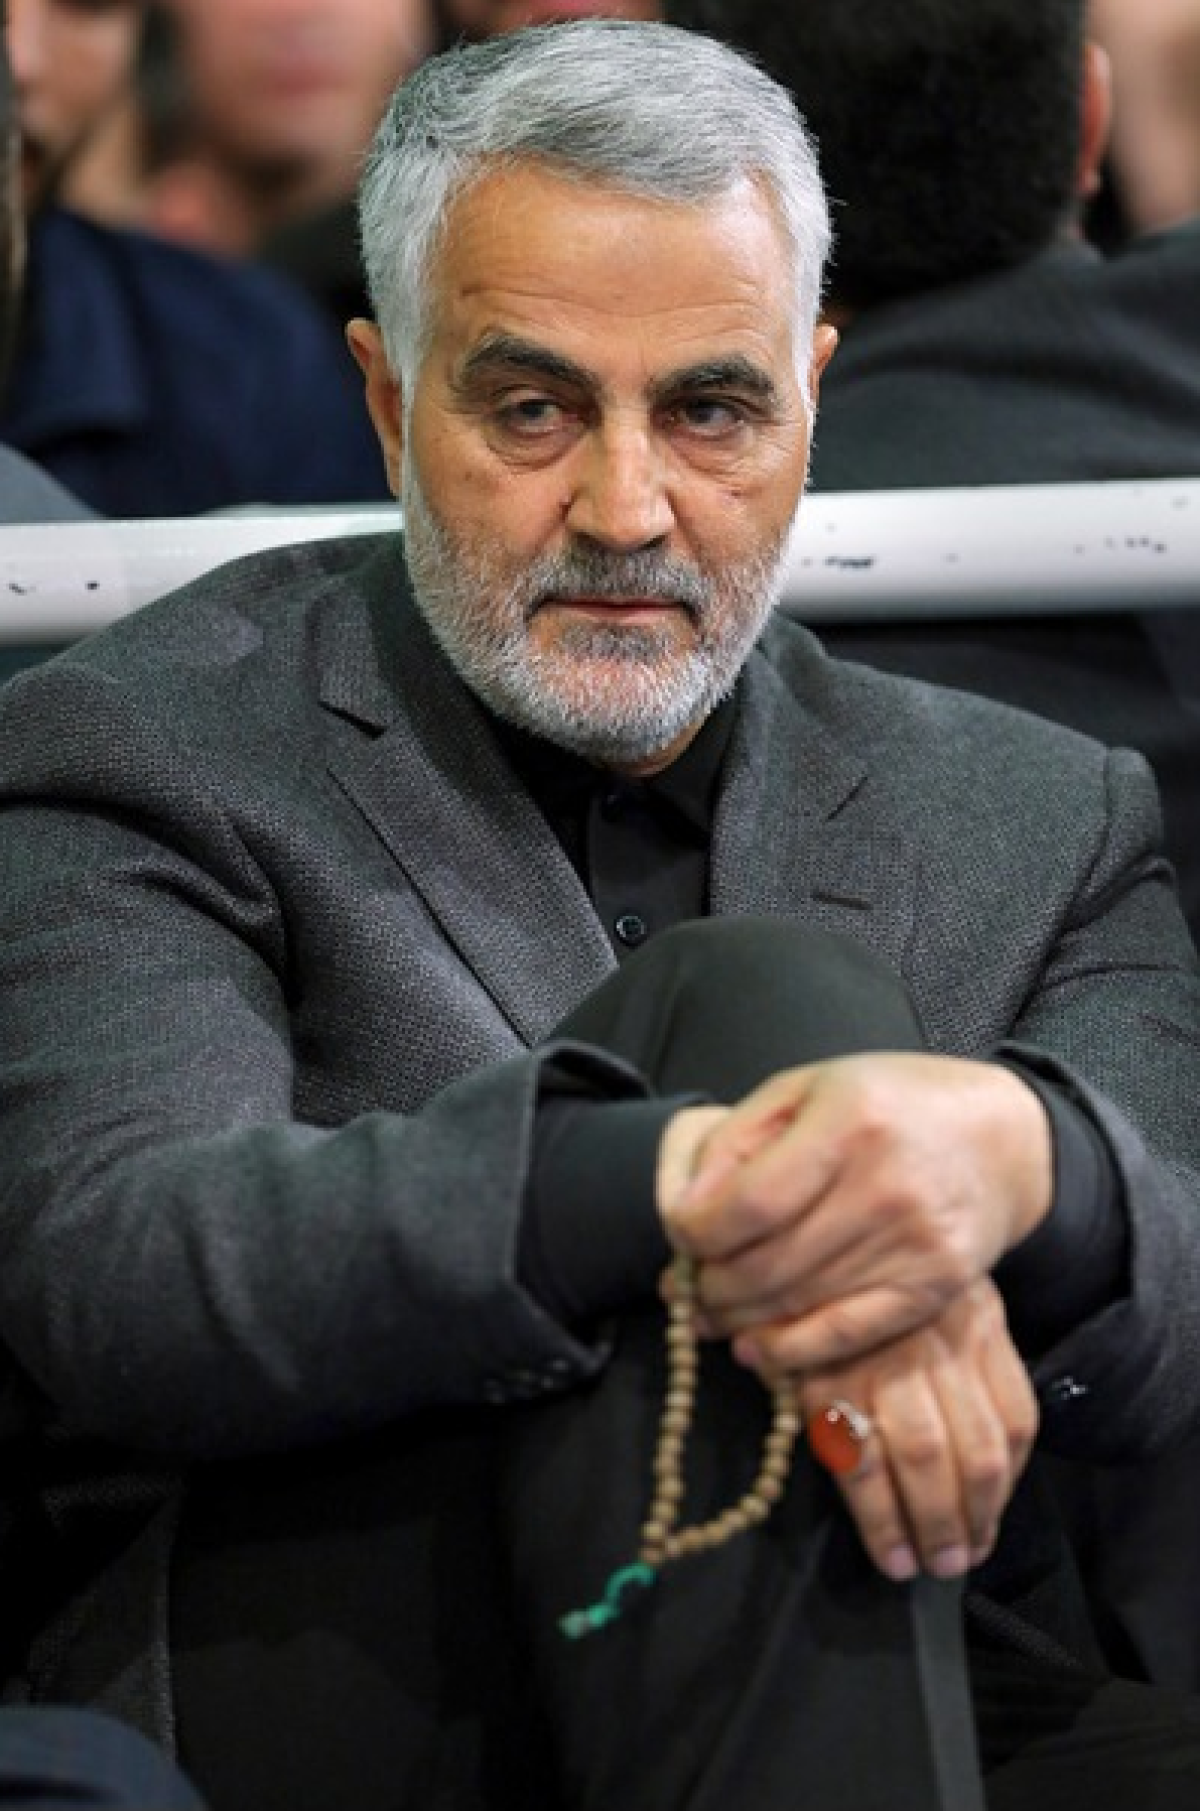  United States Assassinated General Soleimani, But His Legacy Will Live On In The Region